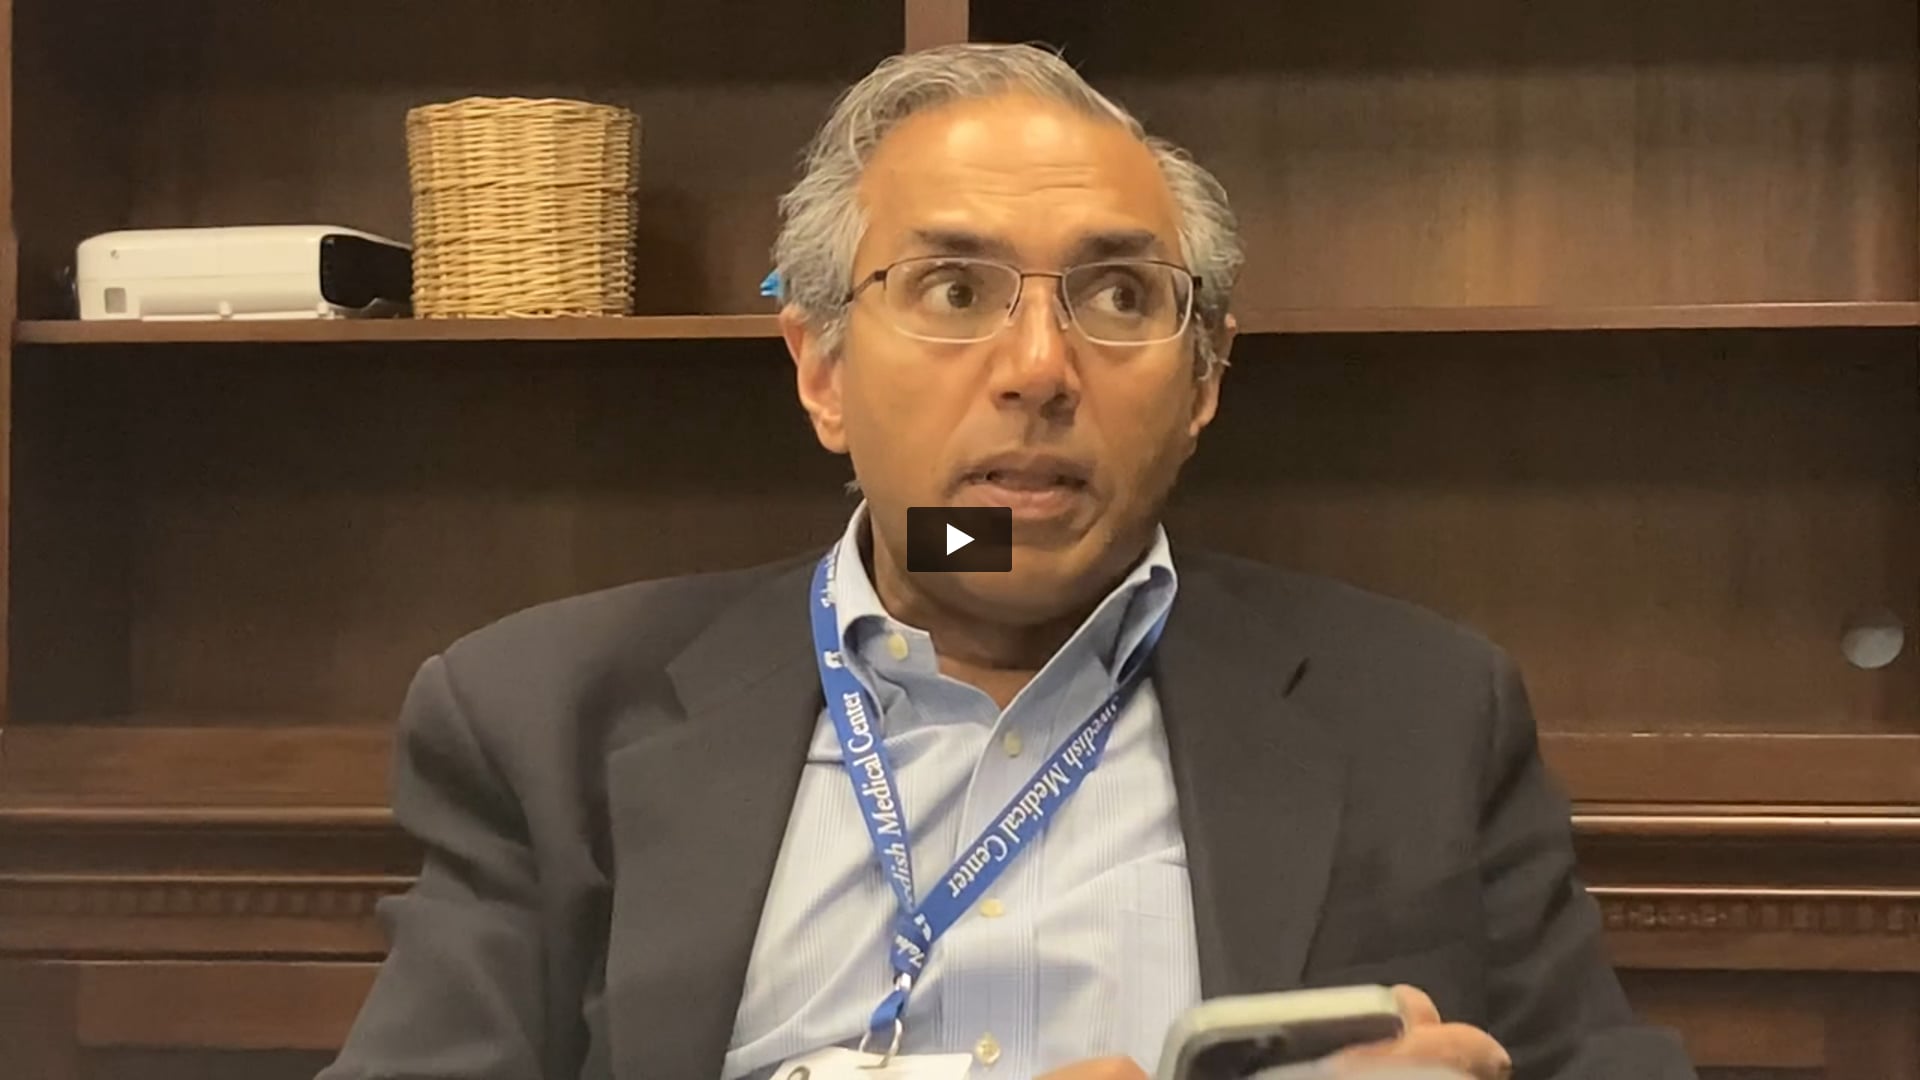 Dr. Rajeev Kumar on research and IRBs, pt. 2